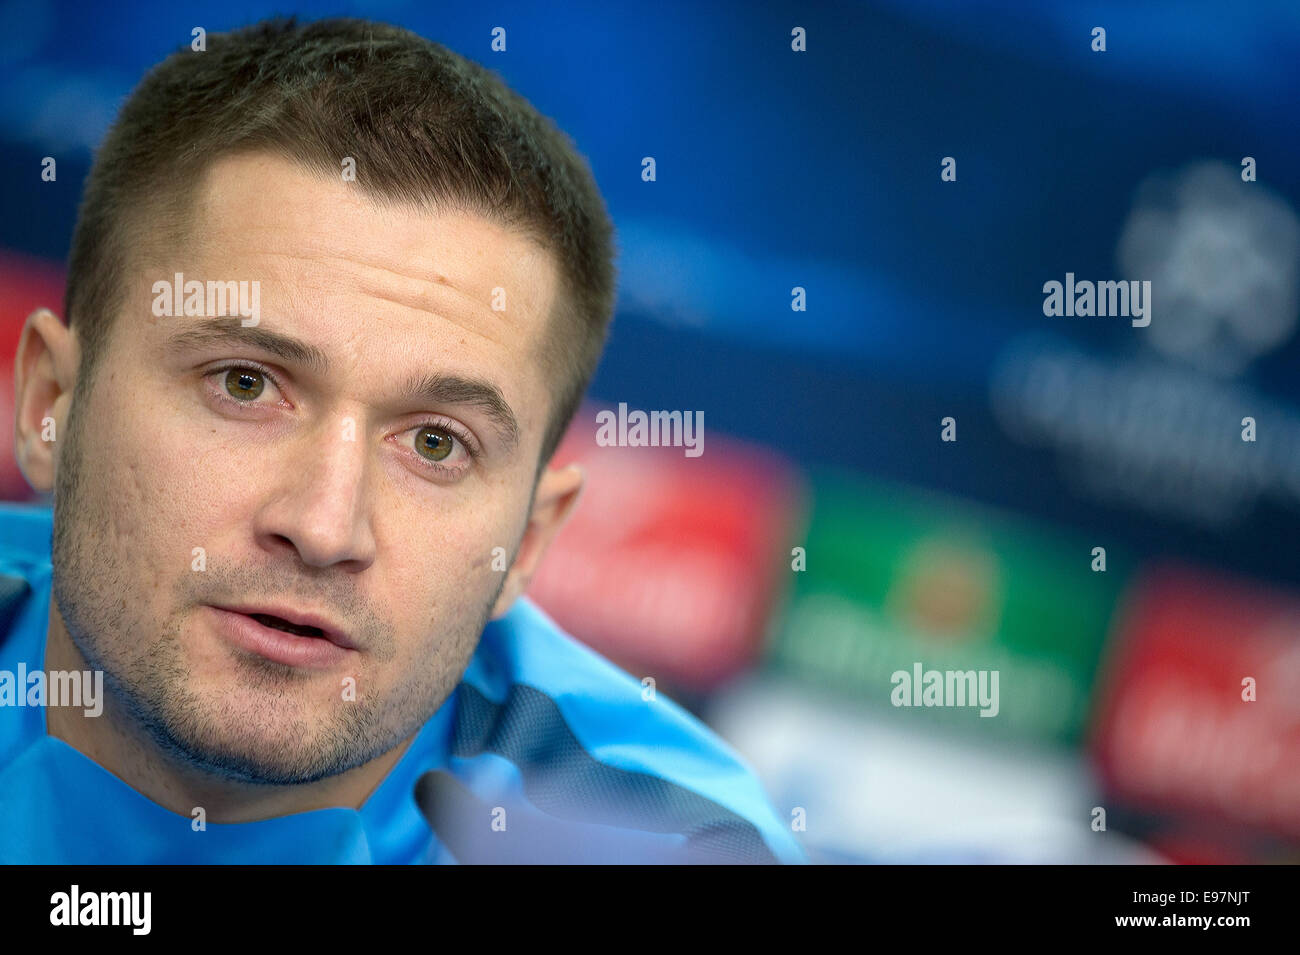 Leverkusen, Germany. 21st Oct, 2014. St. Petersburg's Viktor Fayzulin talks during a press conference in Leverkusen, Germany, 21 October 2014. Bayer Leverkusen will play Zenit St. Petersburg in the Champions League group C match on 22 October 2014. Photo: FEDERICO GAMBARINI/dpa/Alamy Live News Stock Photo